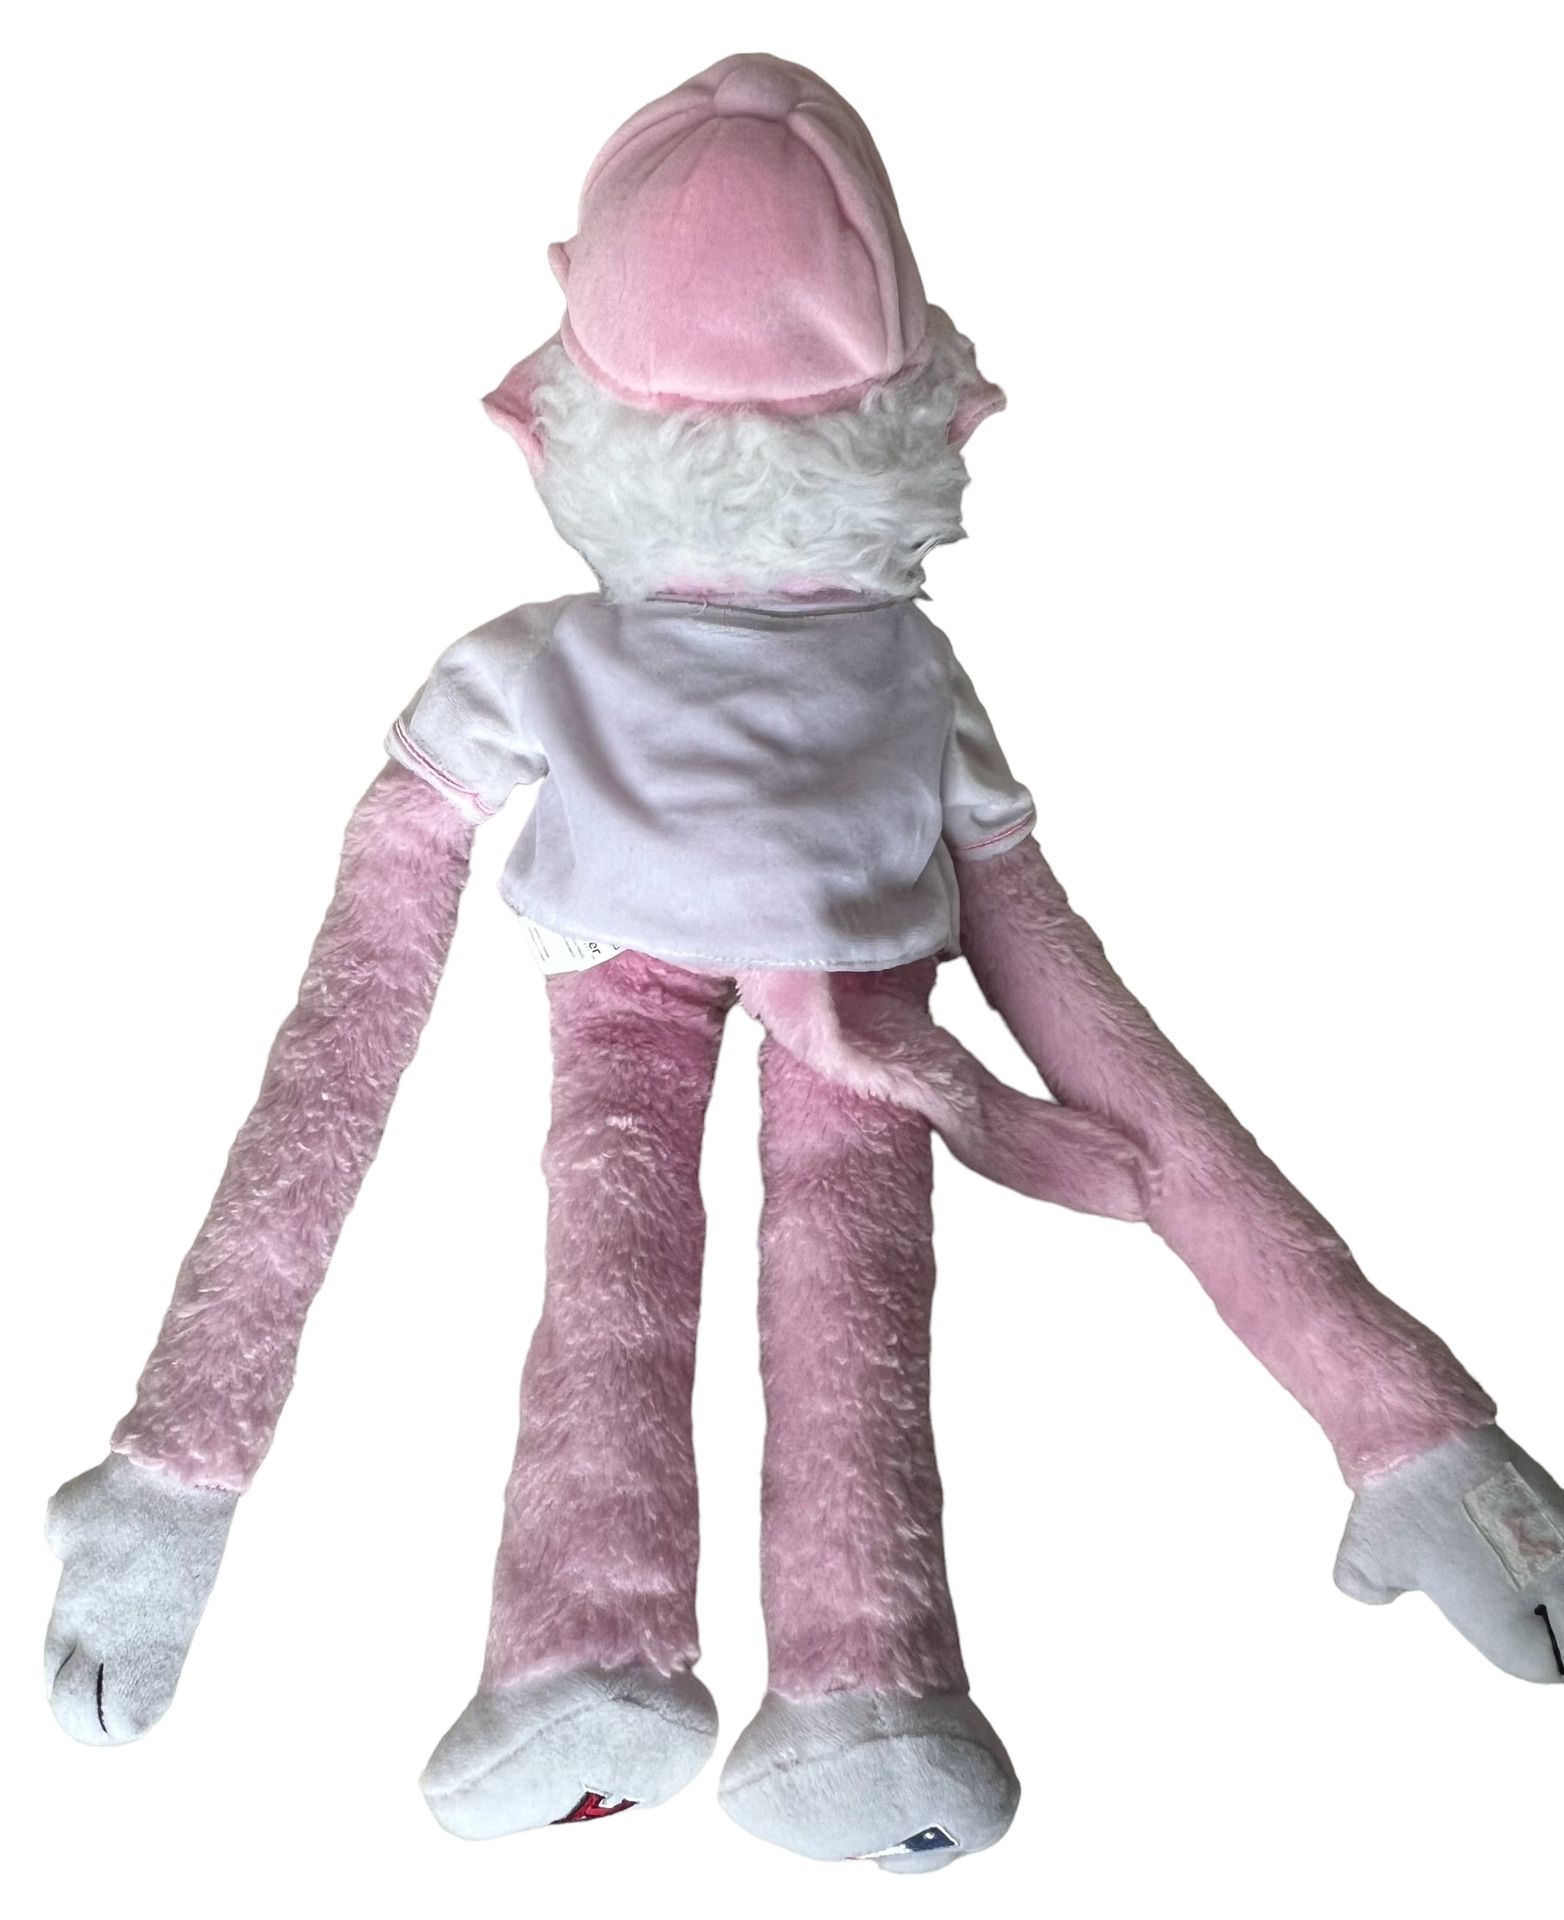 Best Pink Angels Rally Monkey for sale in Irvine, California for 2023